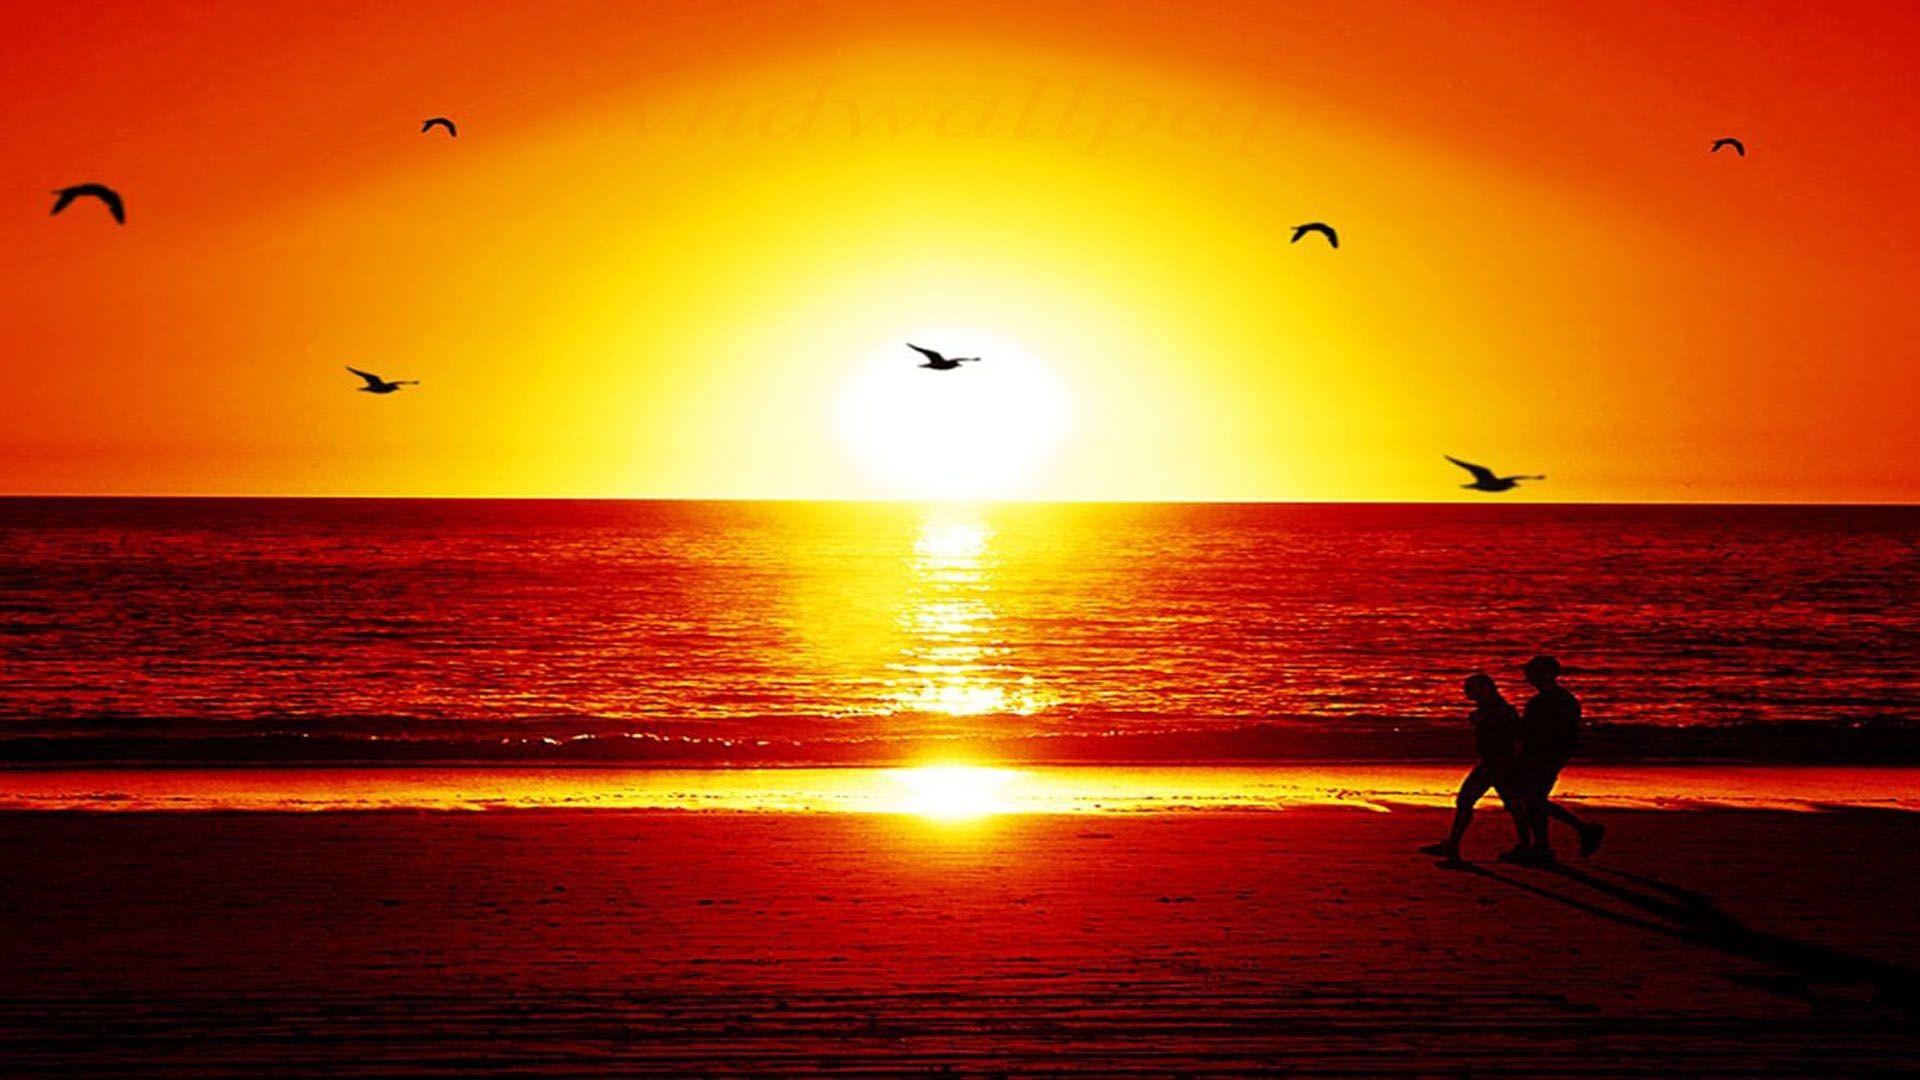 Sunset Wallpapers Hd A14 1920x1080